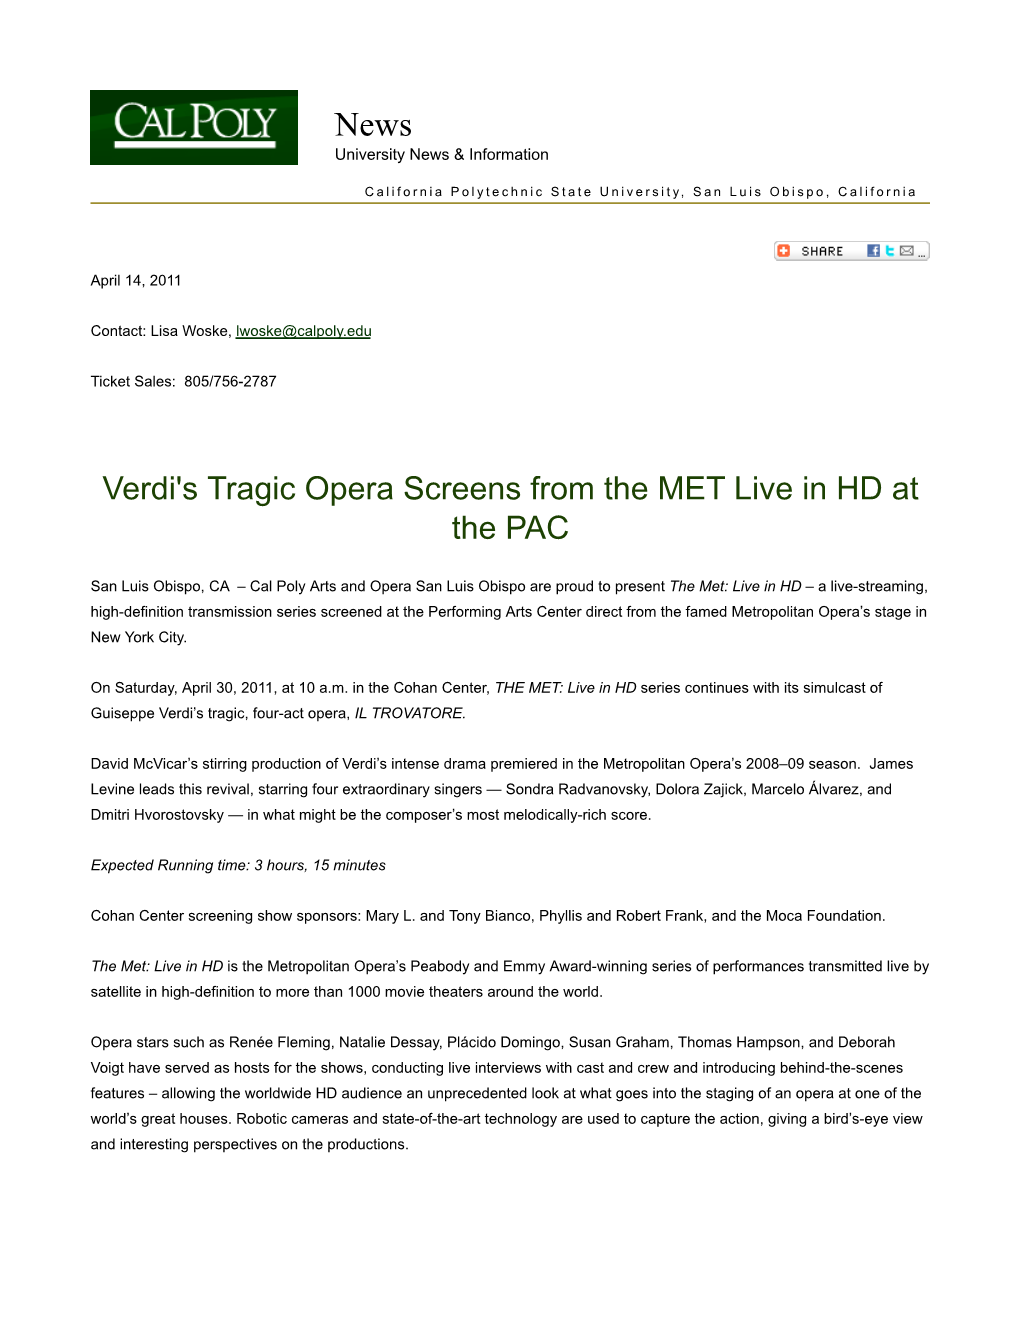 Verdi's Tragic Opera Screens from the MET Live in HD at the PAC